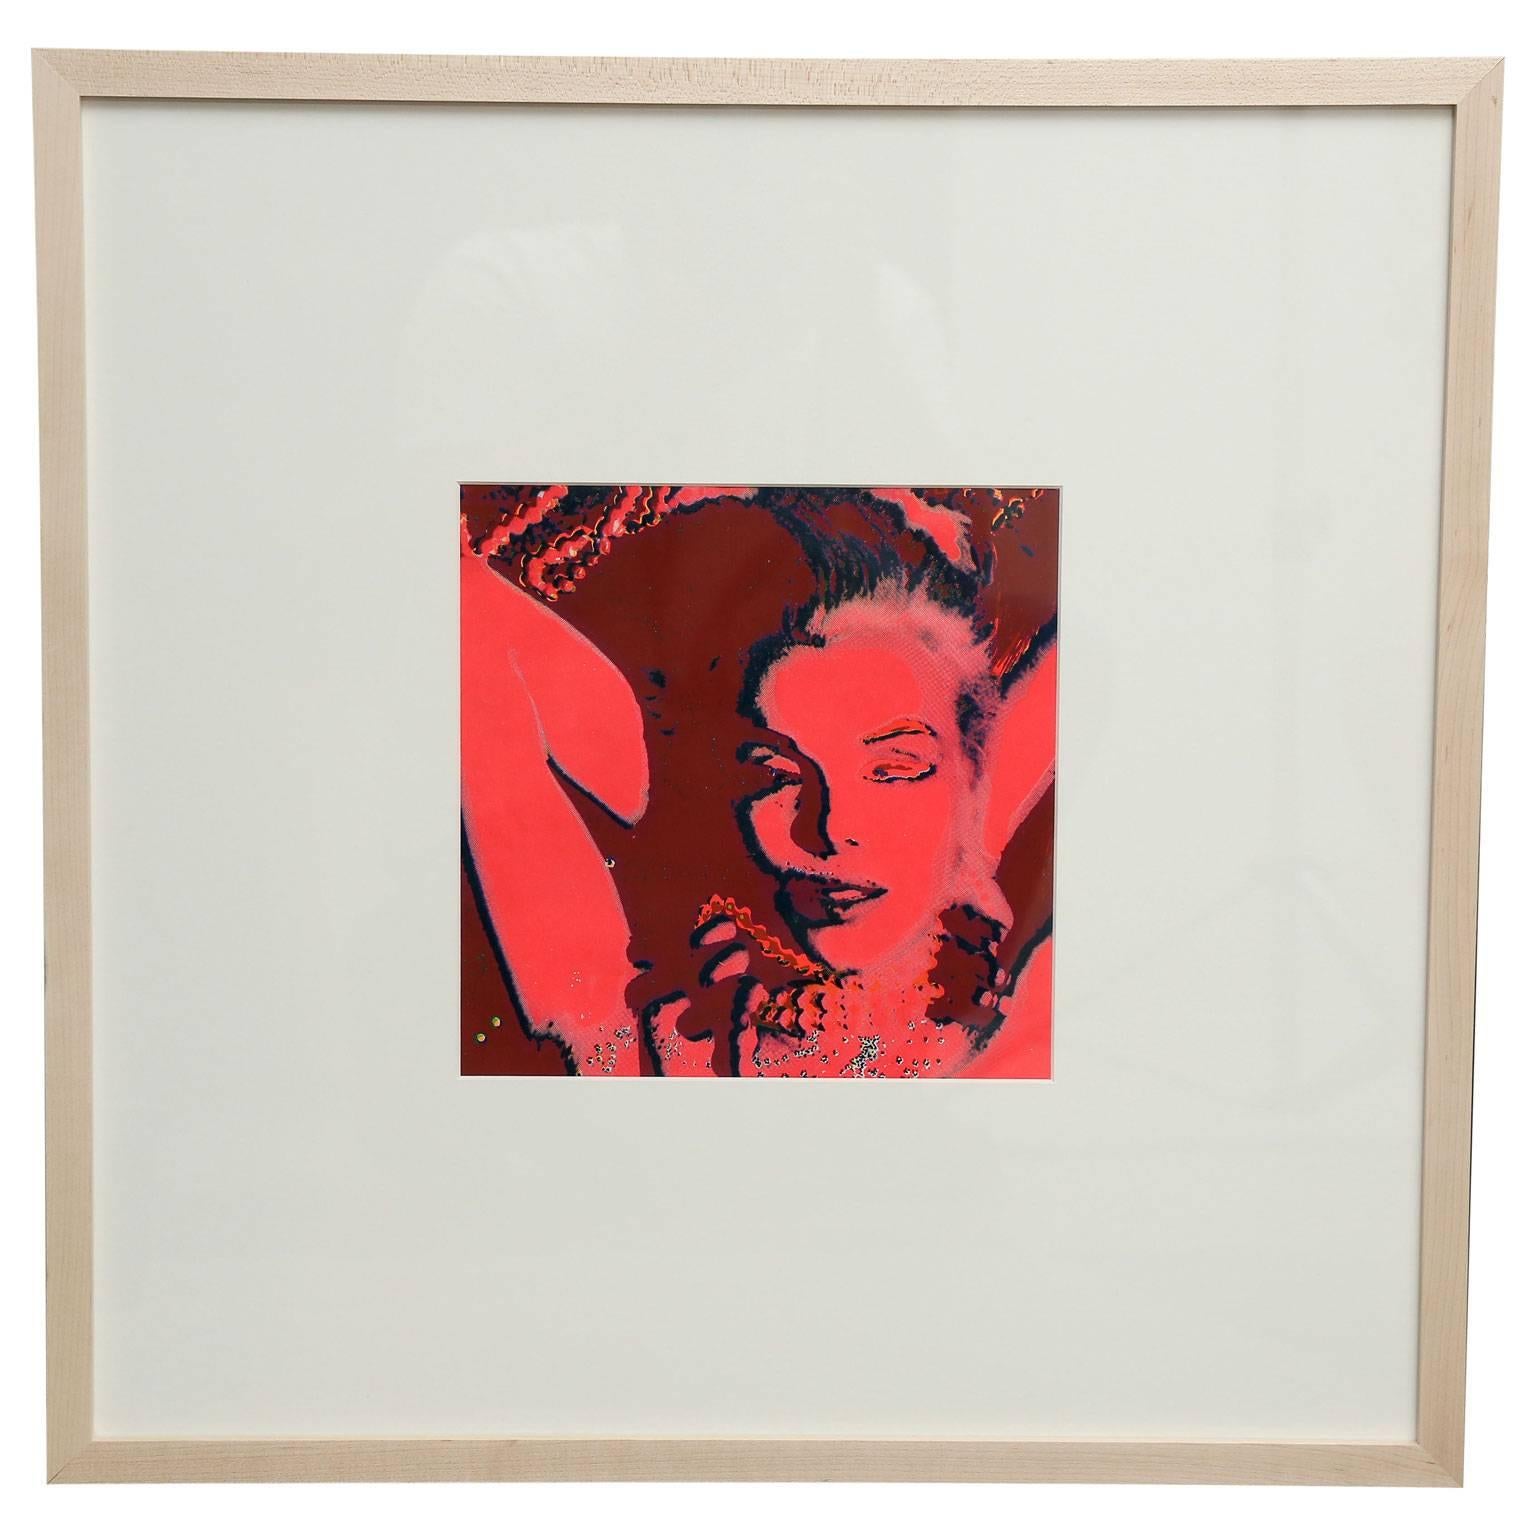 'The Marilyn Monroe Trip - 9' original serigraph artwork by Burt Stern (1929-2013), after 'The Last Sitting,' published in the March 1968 issue of Avant Garde magazine (with a relatively low circulation except in NYC), and matted and framed in